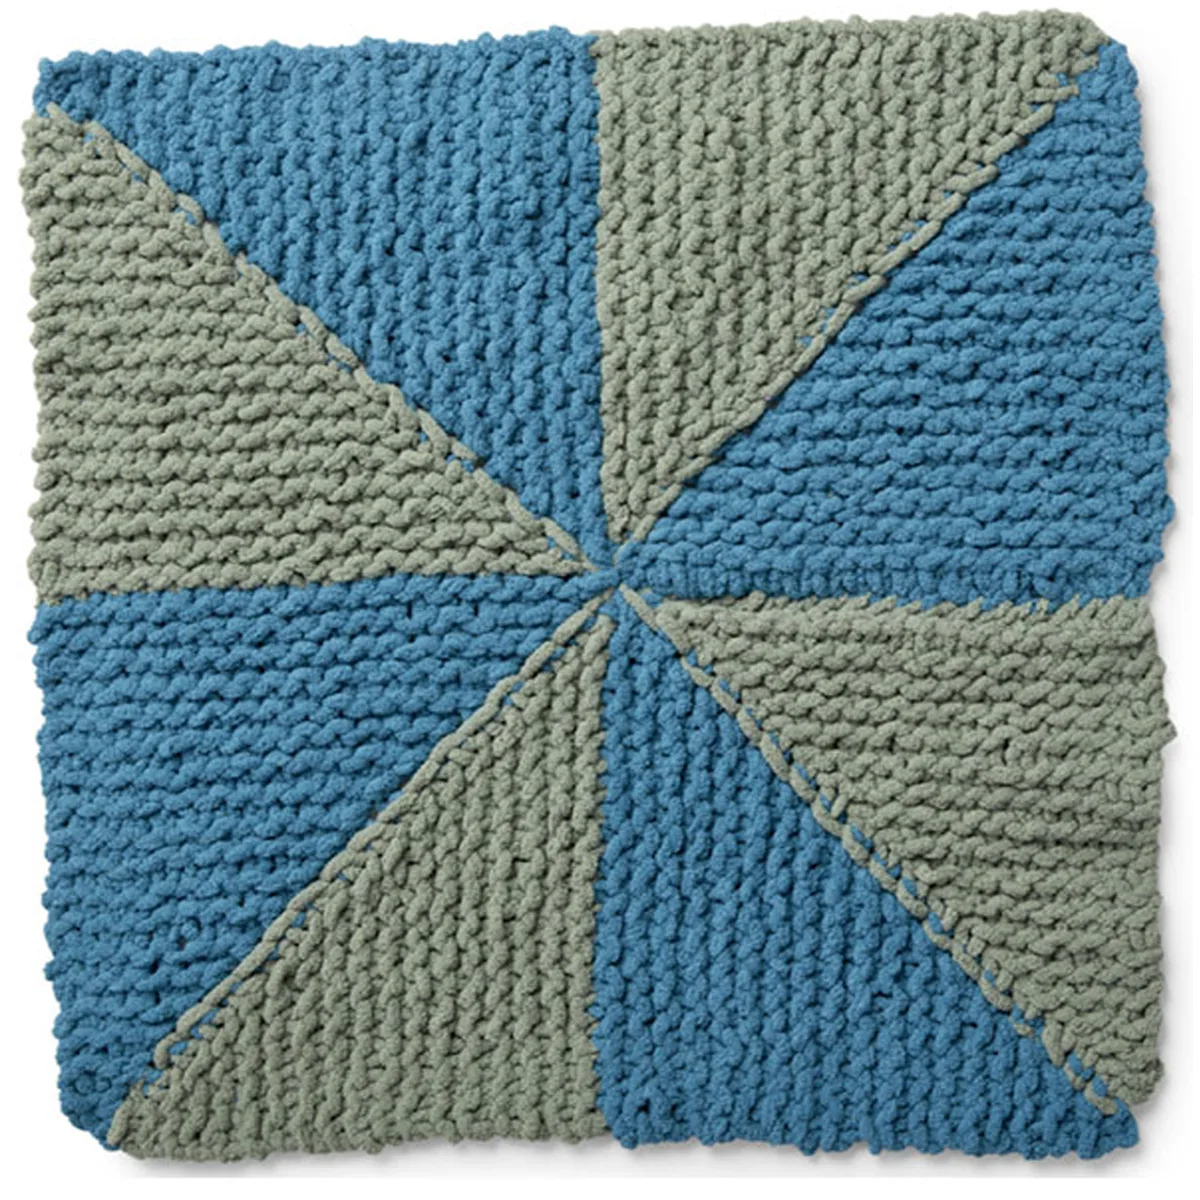 Knitted Square in the Pinwheel Design with blue and green yarn colors.